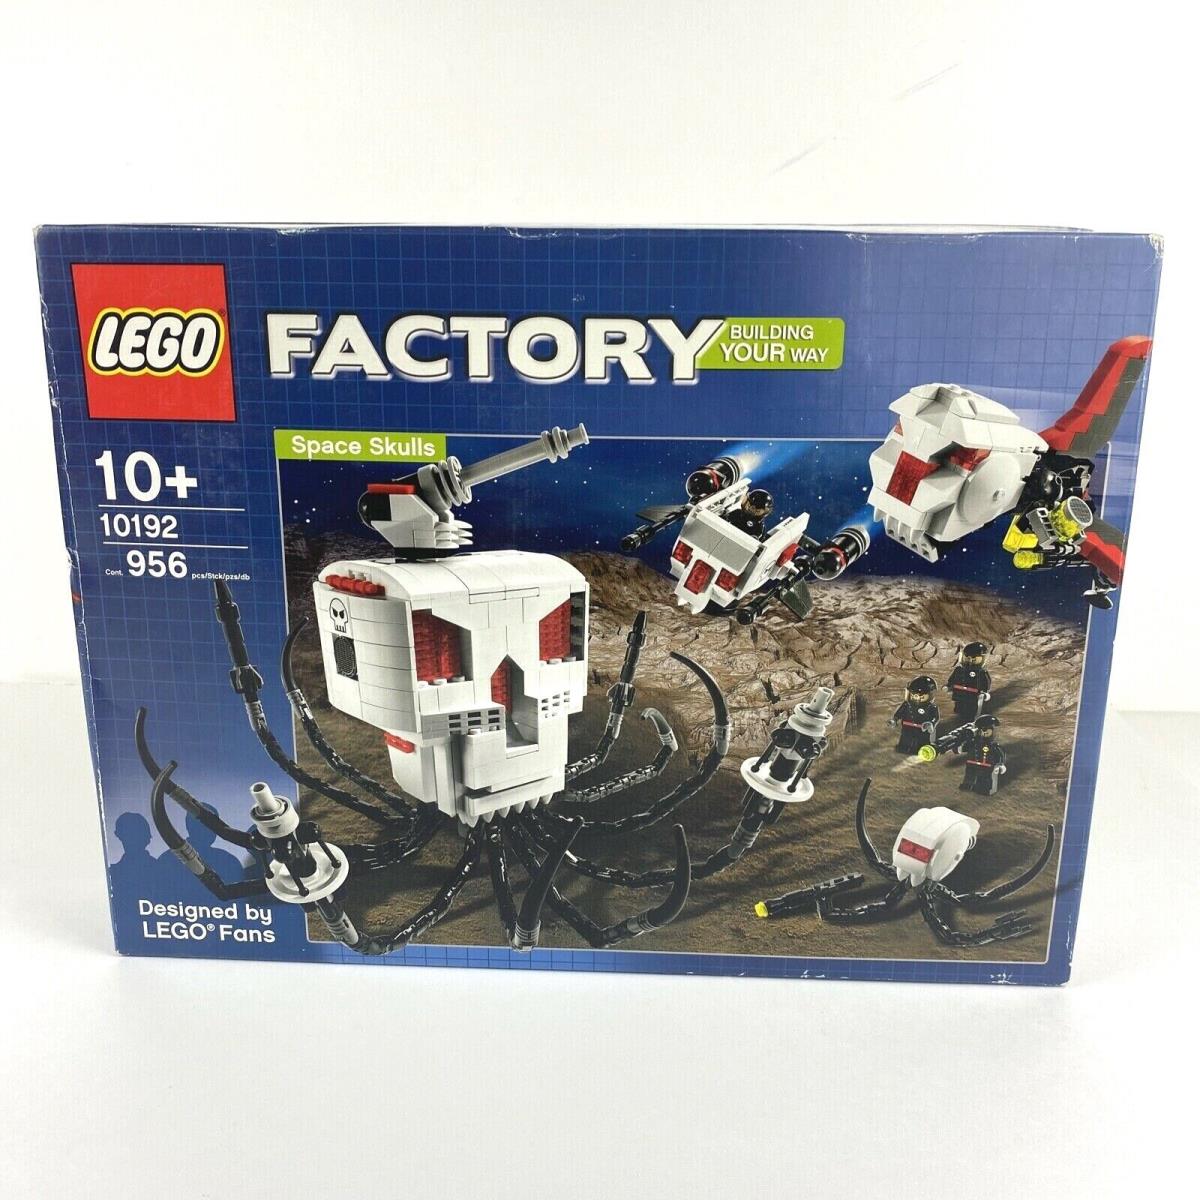 Lego 10192 Factory: Designed by Fans - Space Skulls - 956 Pcs Building Your Way